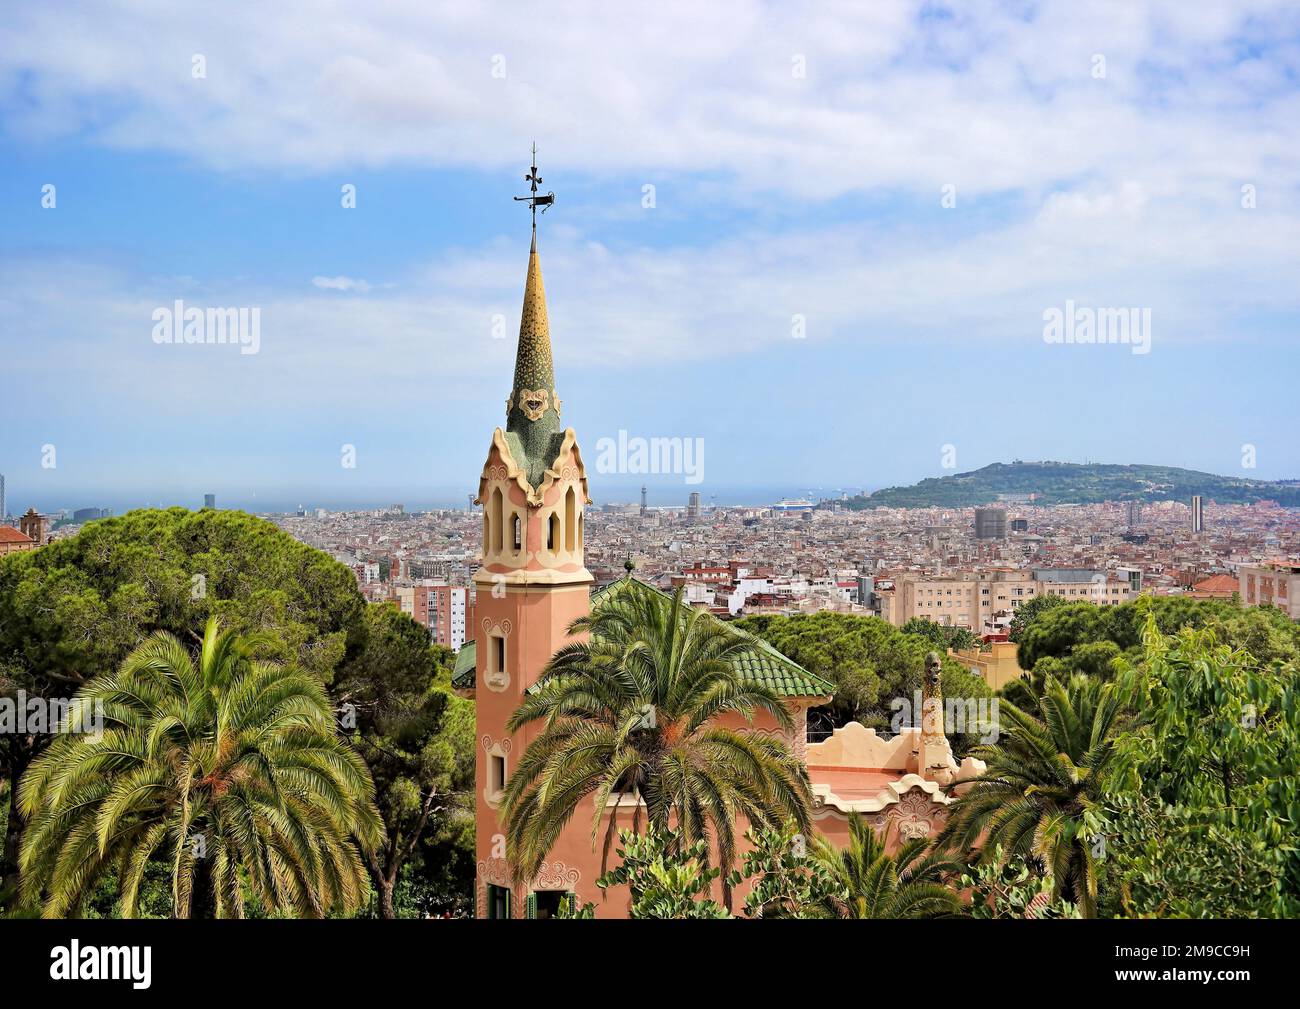 Barcelona, Spain - May 2018: Spire on the tower of the House of Antoni Gaudi in the Guell Park at modernist style Stock Photo